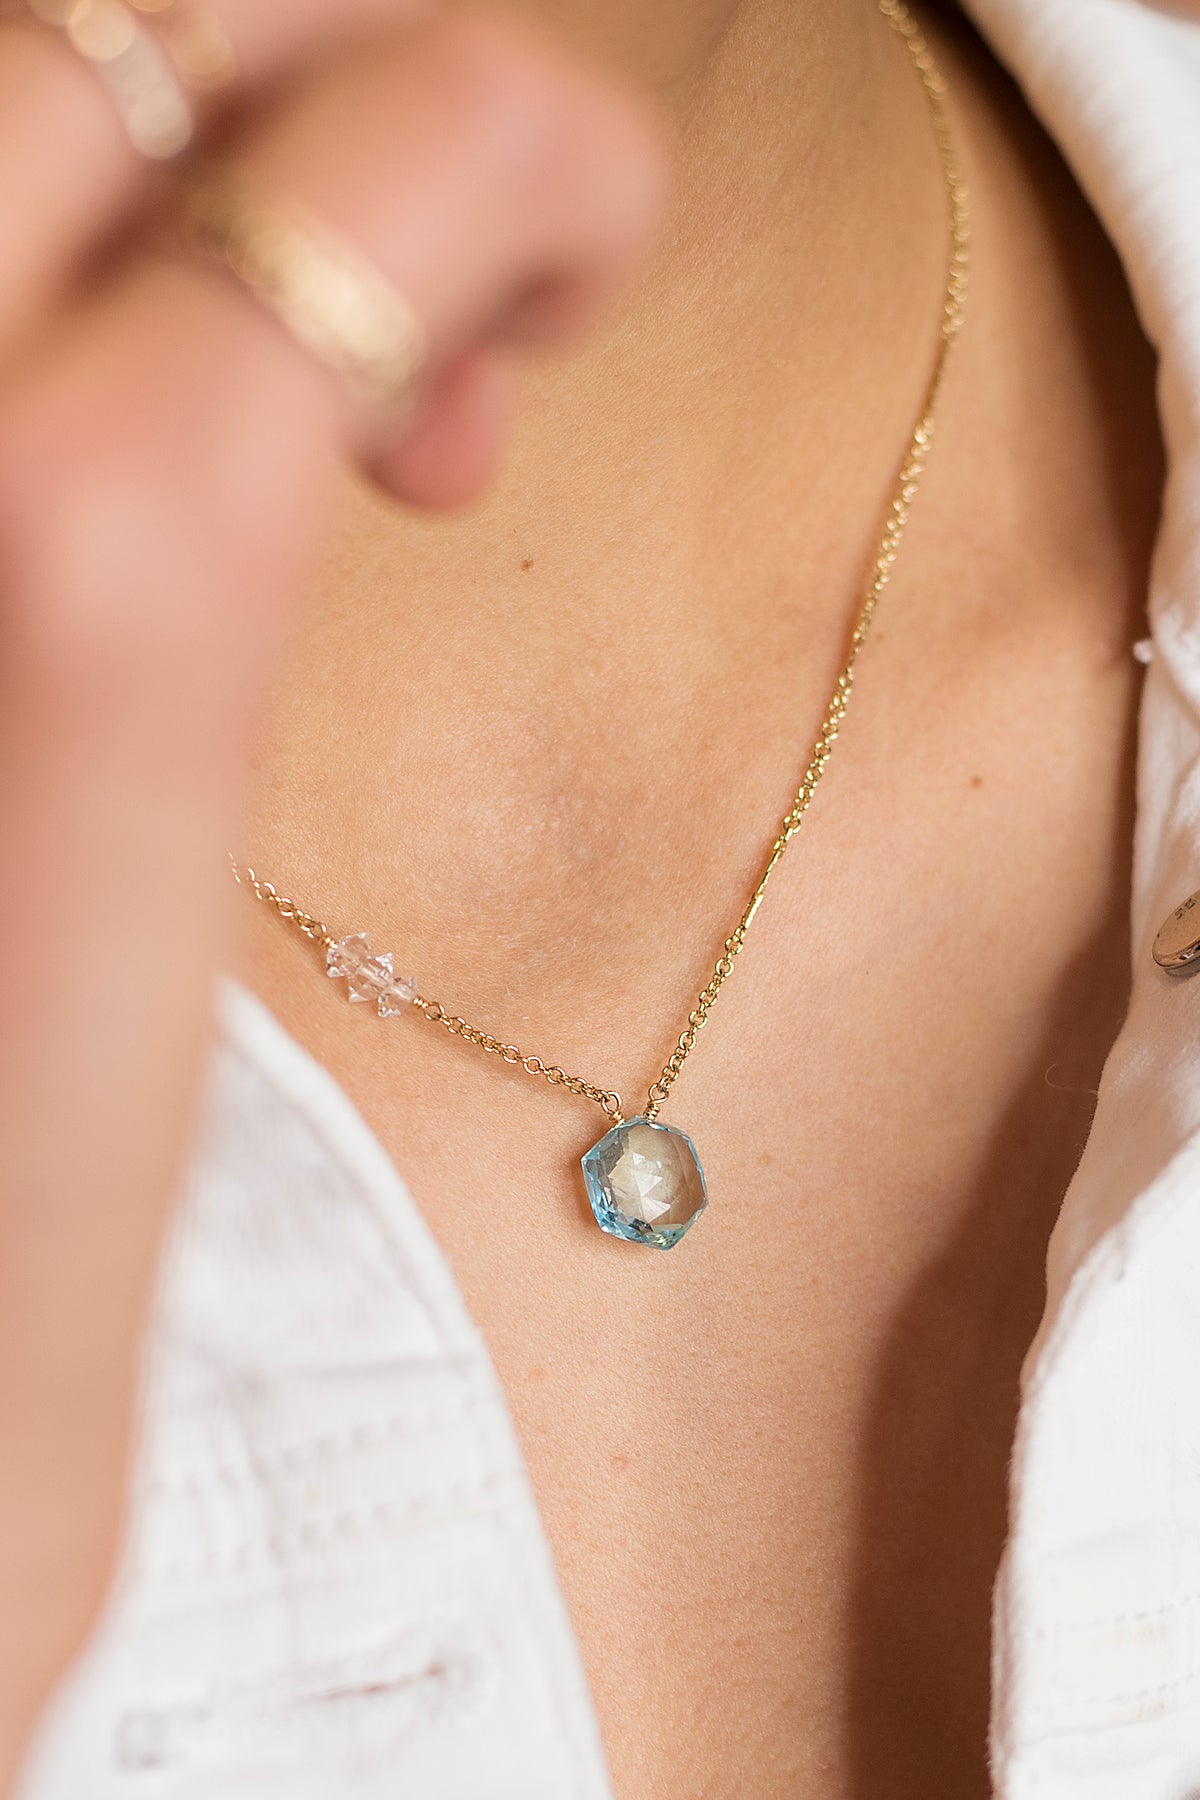 Blue Topaz and Herkimer Necklace